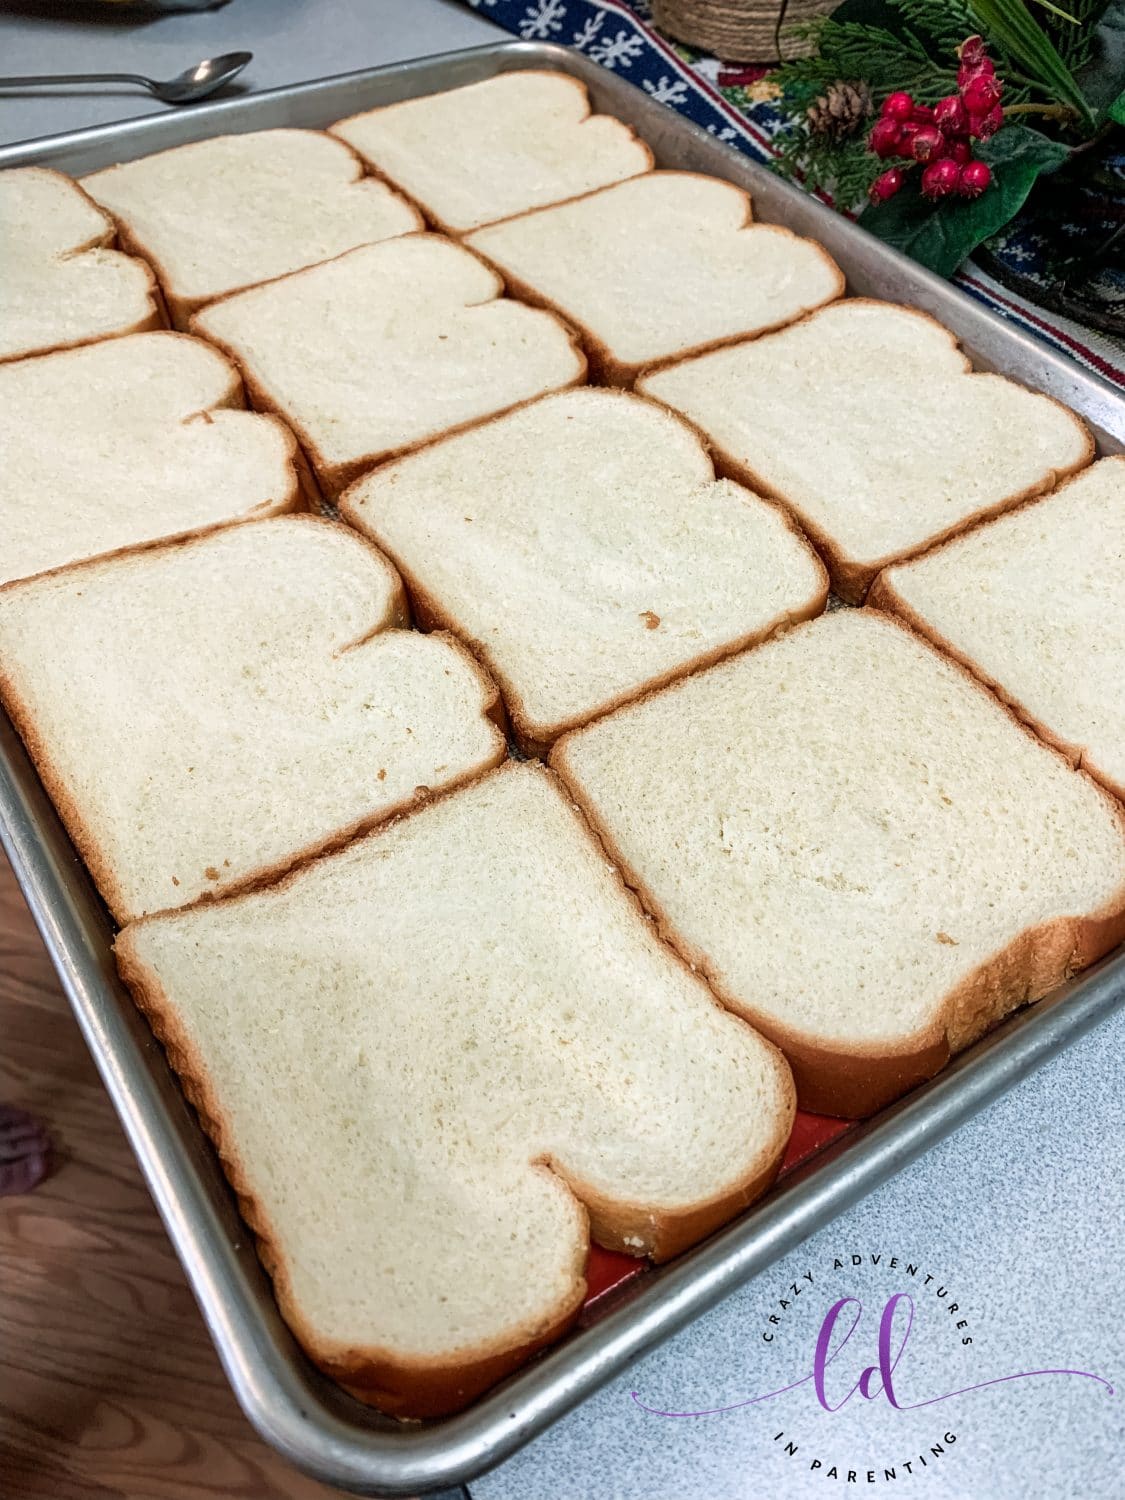 Arranging Bread for Sheet Pan Cheesy Baked Egg Toast